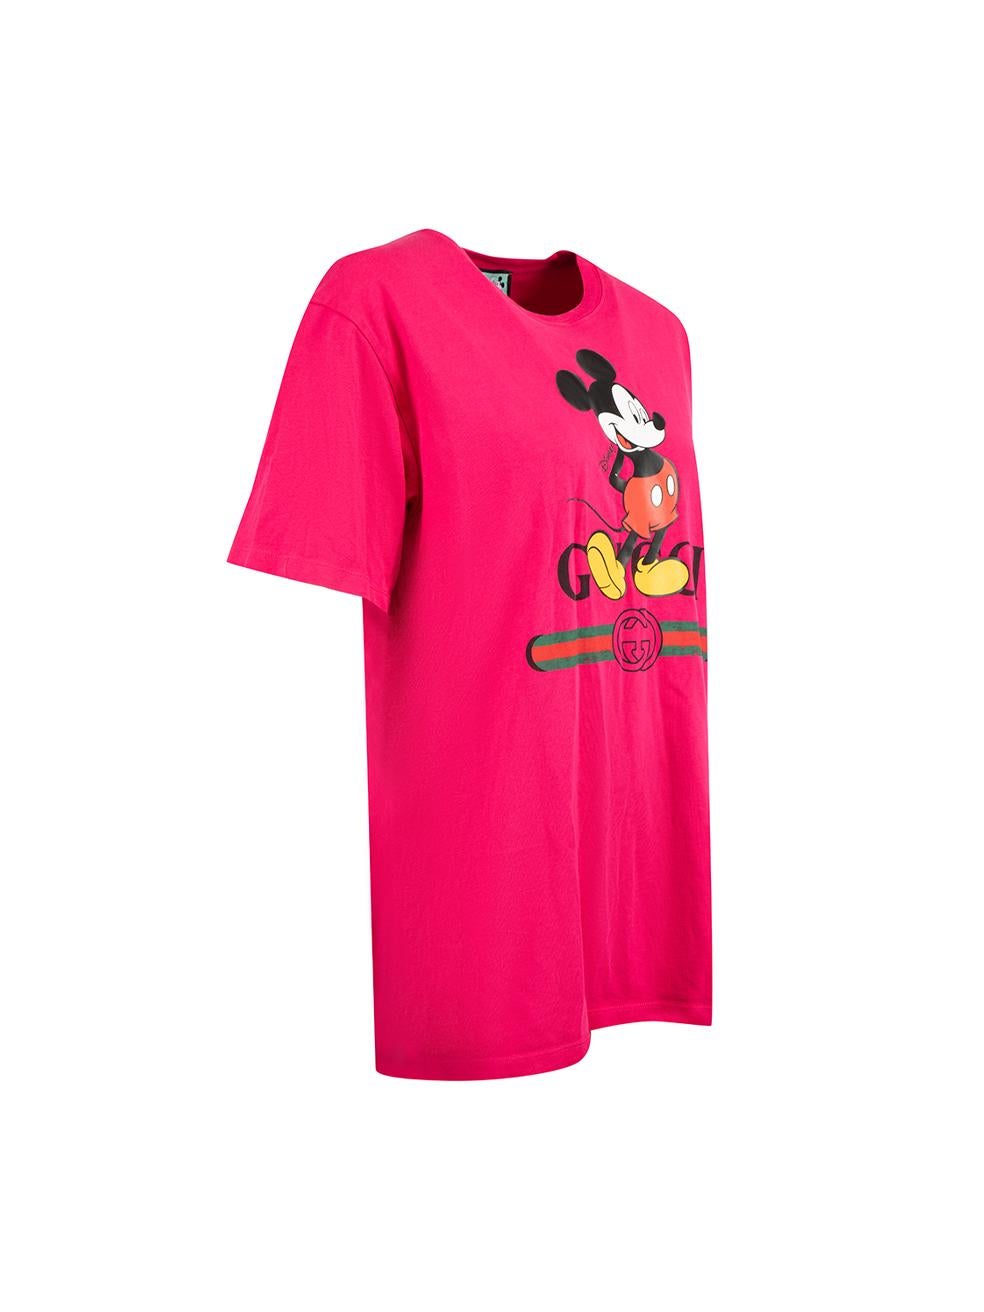 CONDITION is Very good. Minimal wear to t-shirt is evident. Minimal cracking to graphic on this used Disney x Gucci designer resale item.

Details
Disney x Gucci
Hot pink
Cotton
T-shirt
Oversized fit
Mickey mouse print
Round neckline
Made in Italy